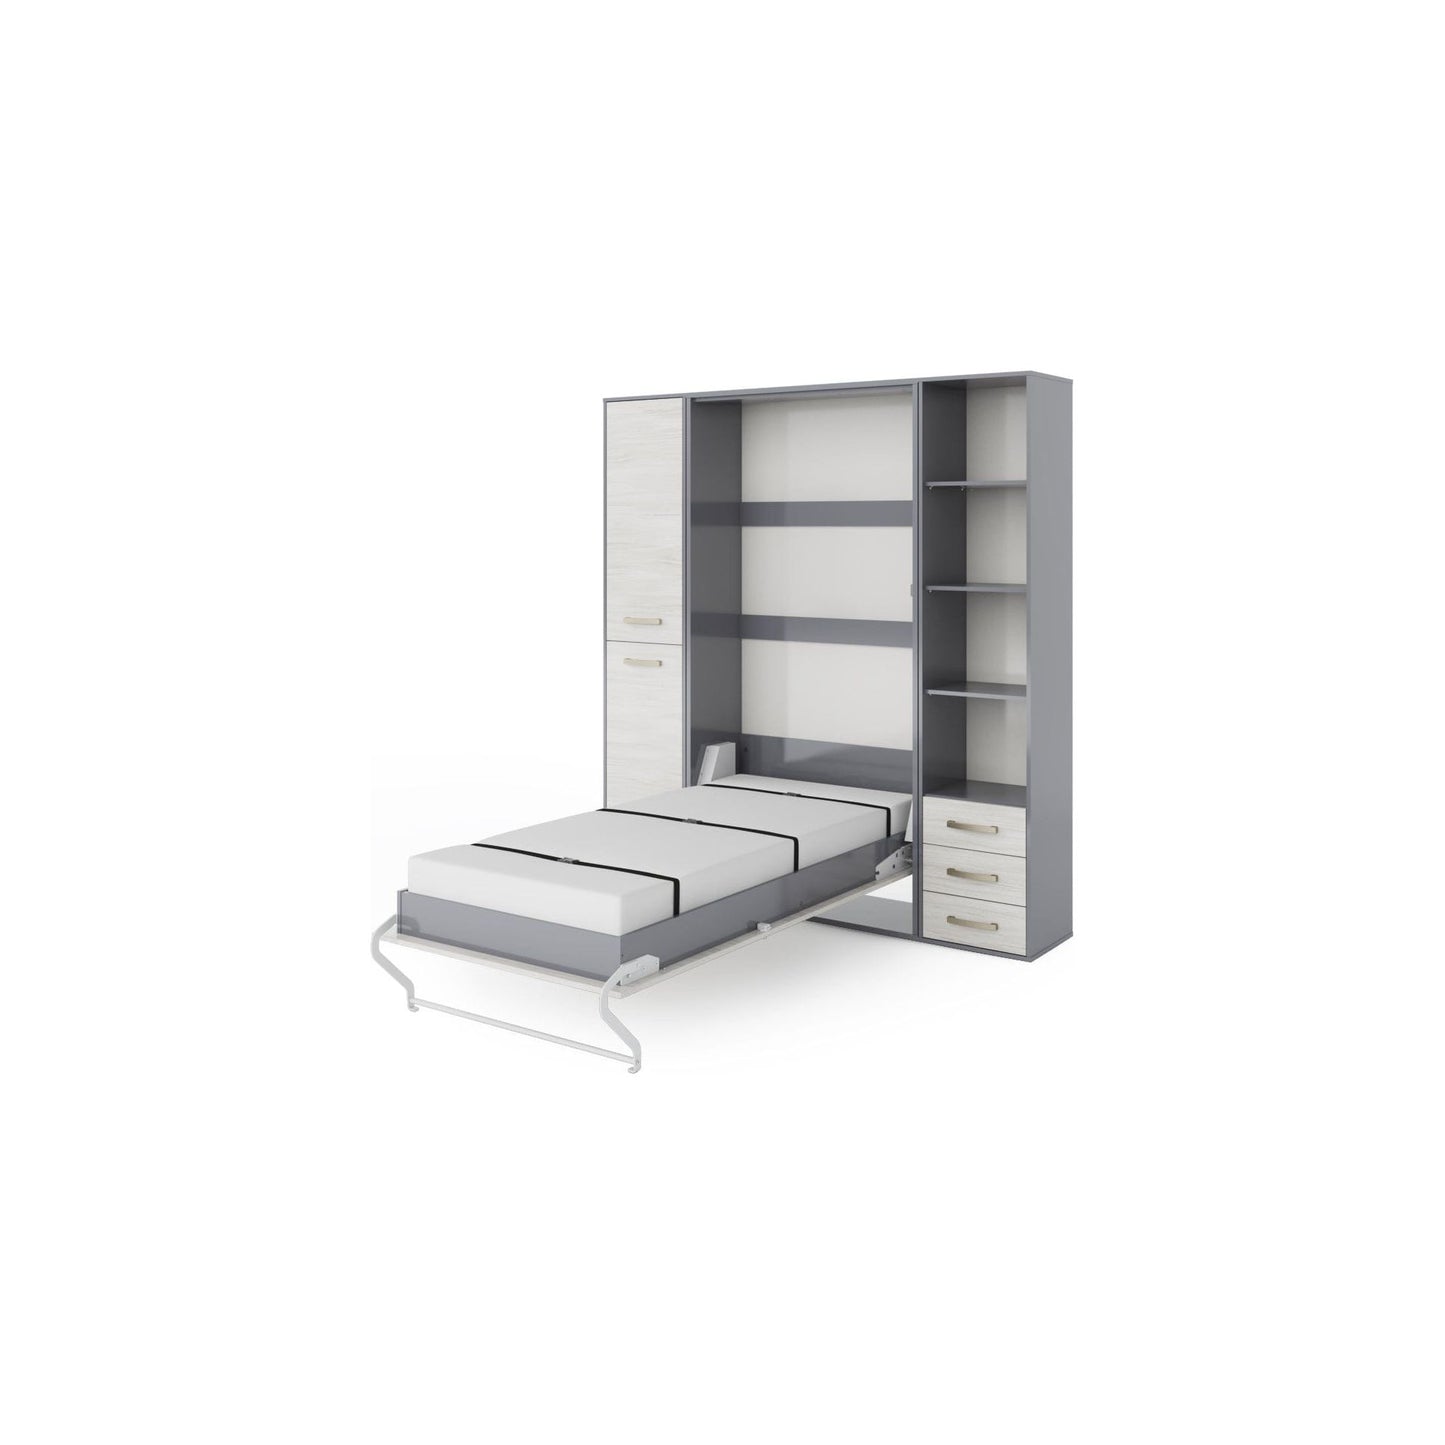 Maxima House Maxima House Invento Vertical Wall Bed, European Twin Size with 2 cabinets